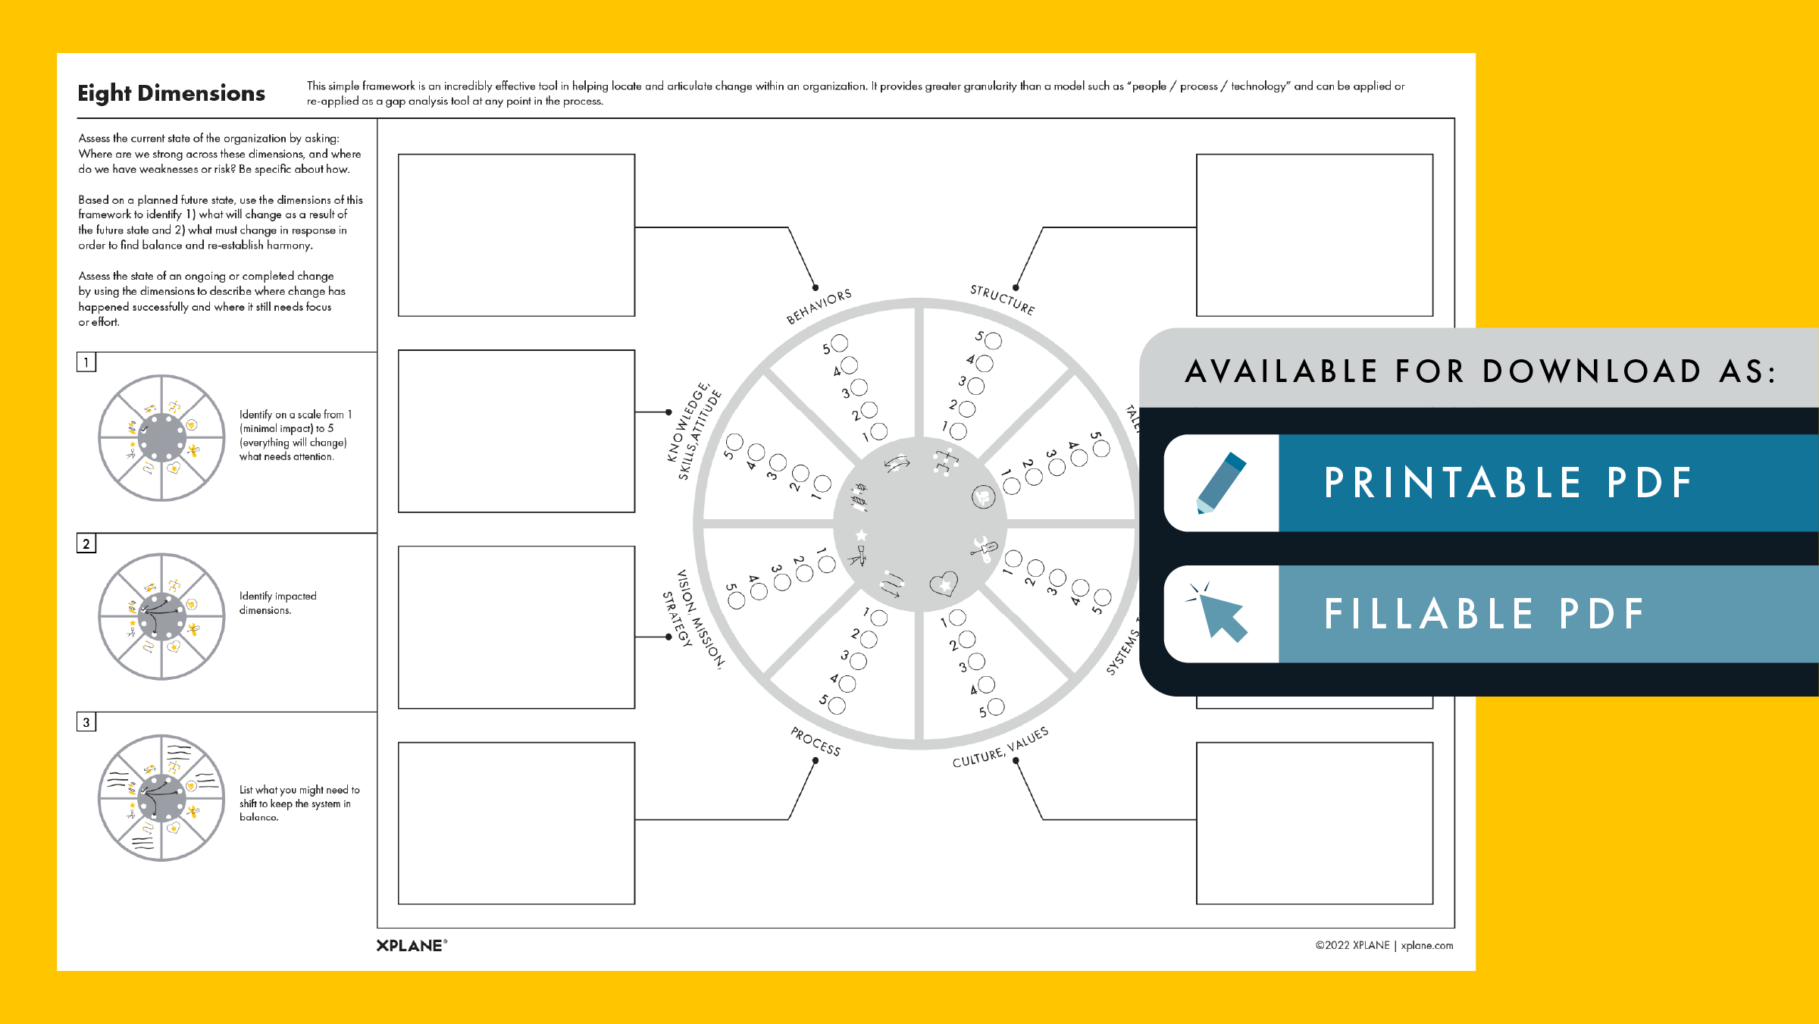 Eight Dimensions worksheet against a yellow background. Two tabs under the header "AVAILABLE FOR DOWNLOAD AS" indicate available file types available.